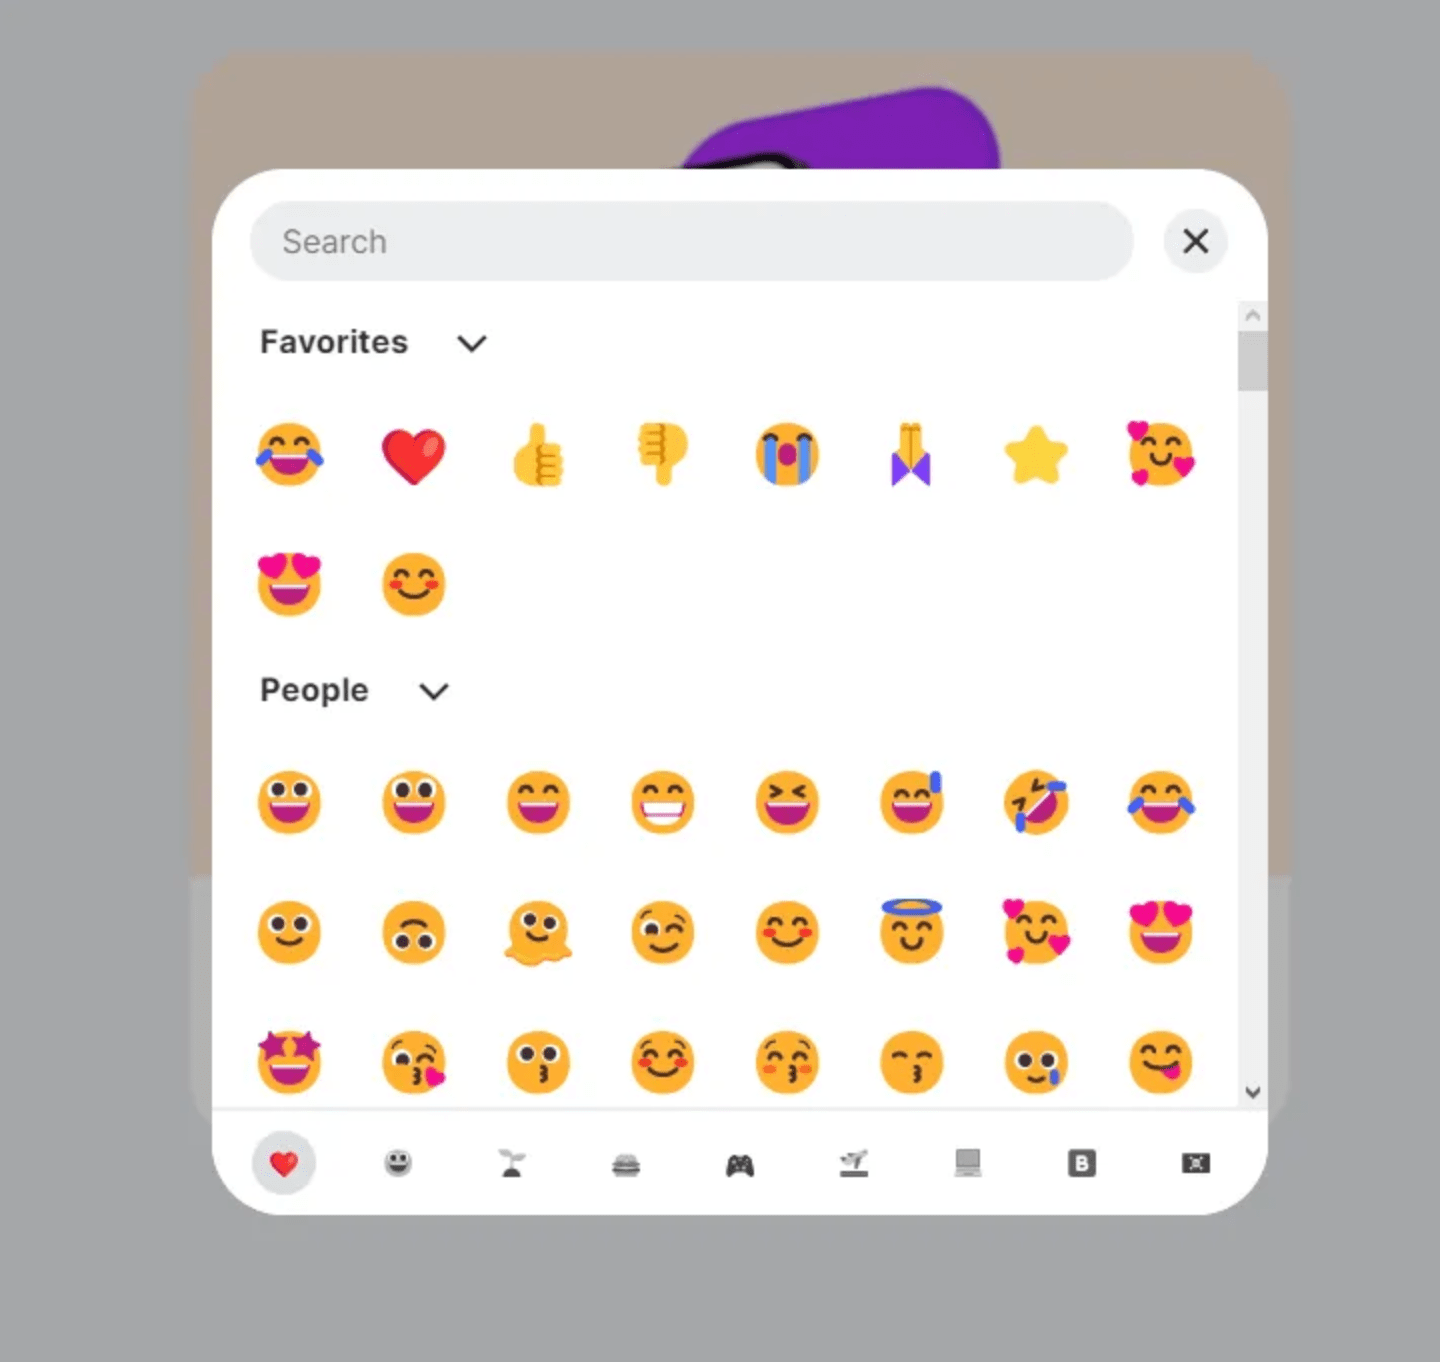 An image of the emoji picker